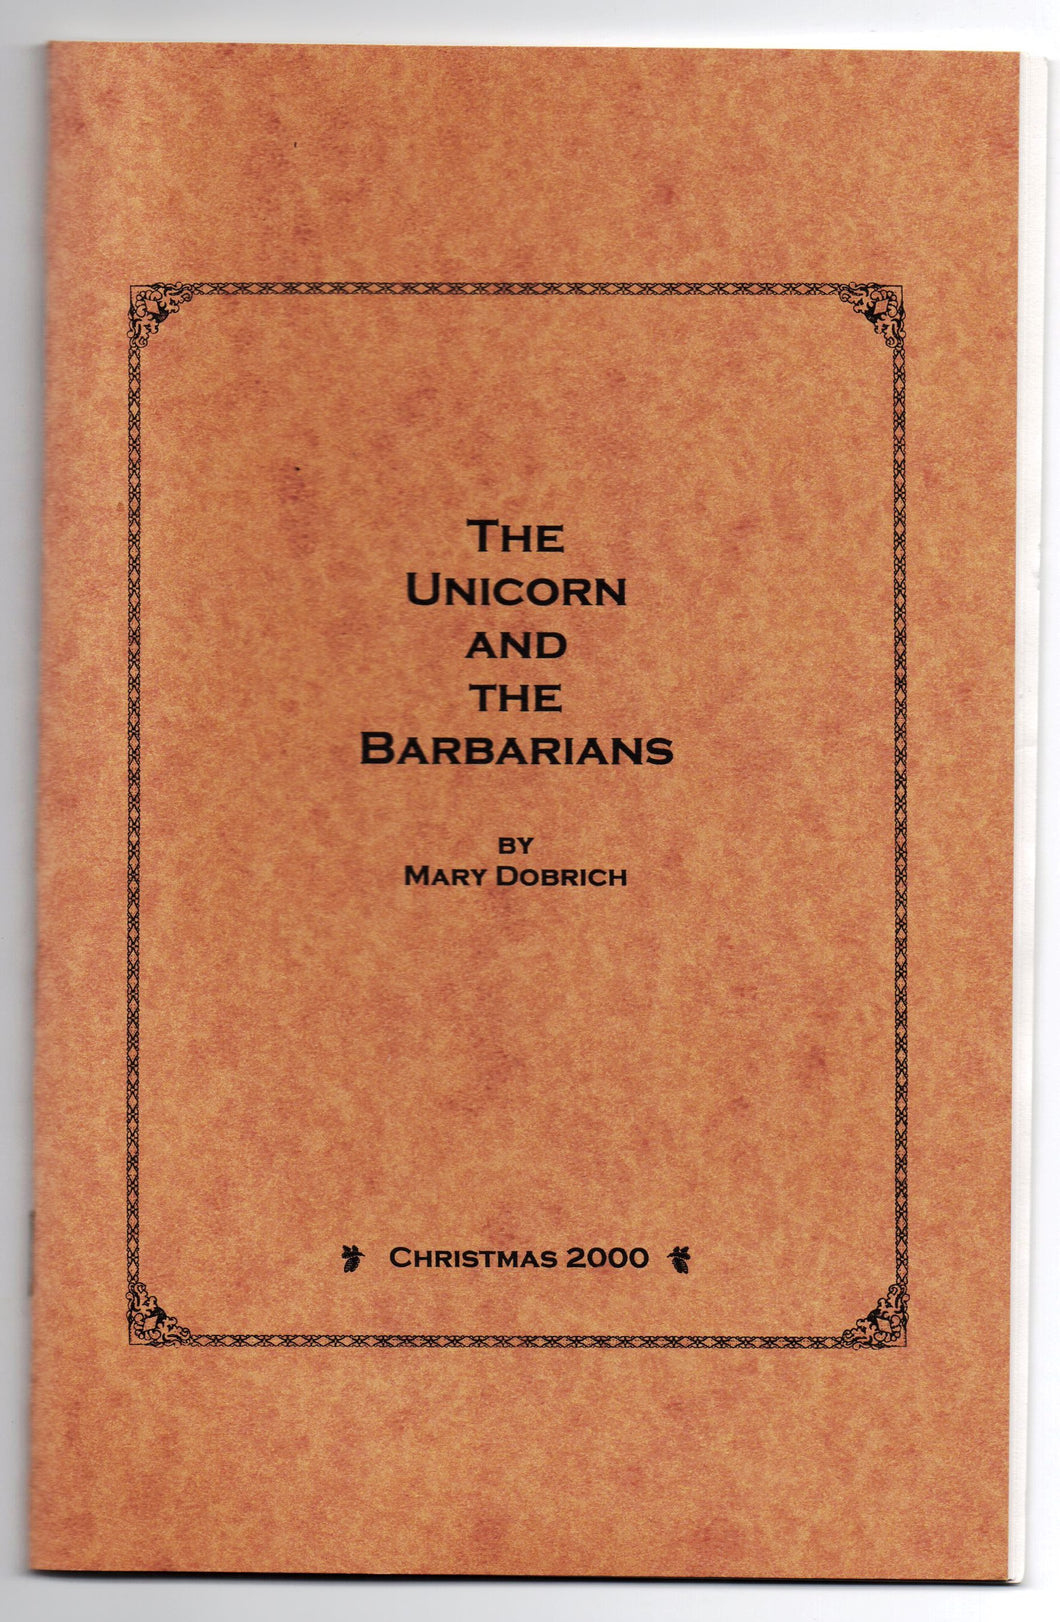 The Unicorn and the Barbarians